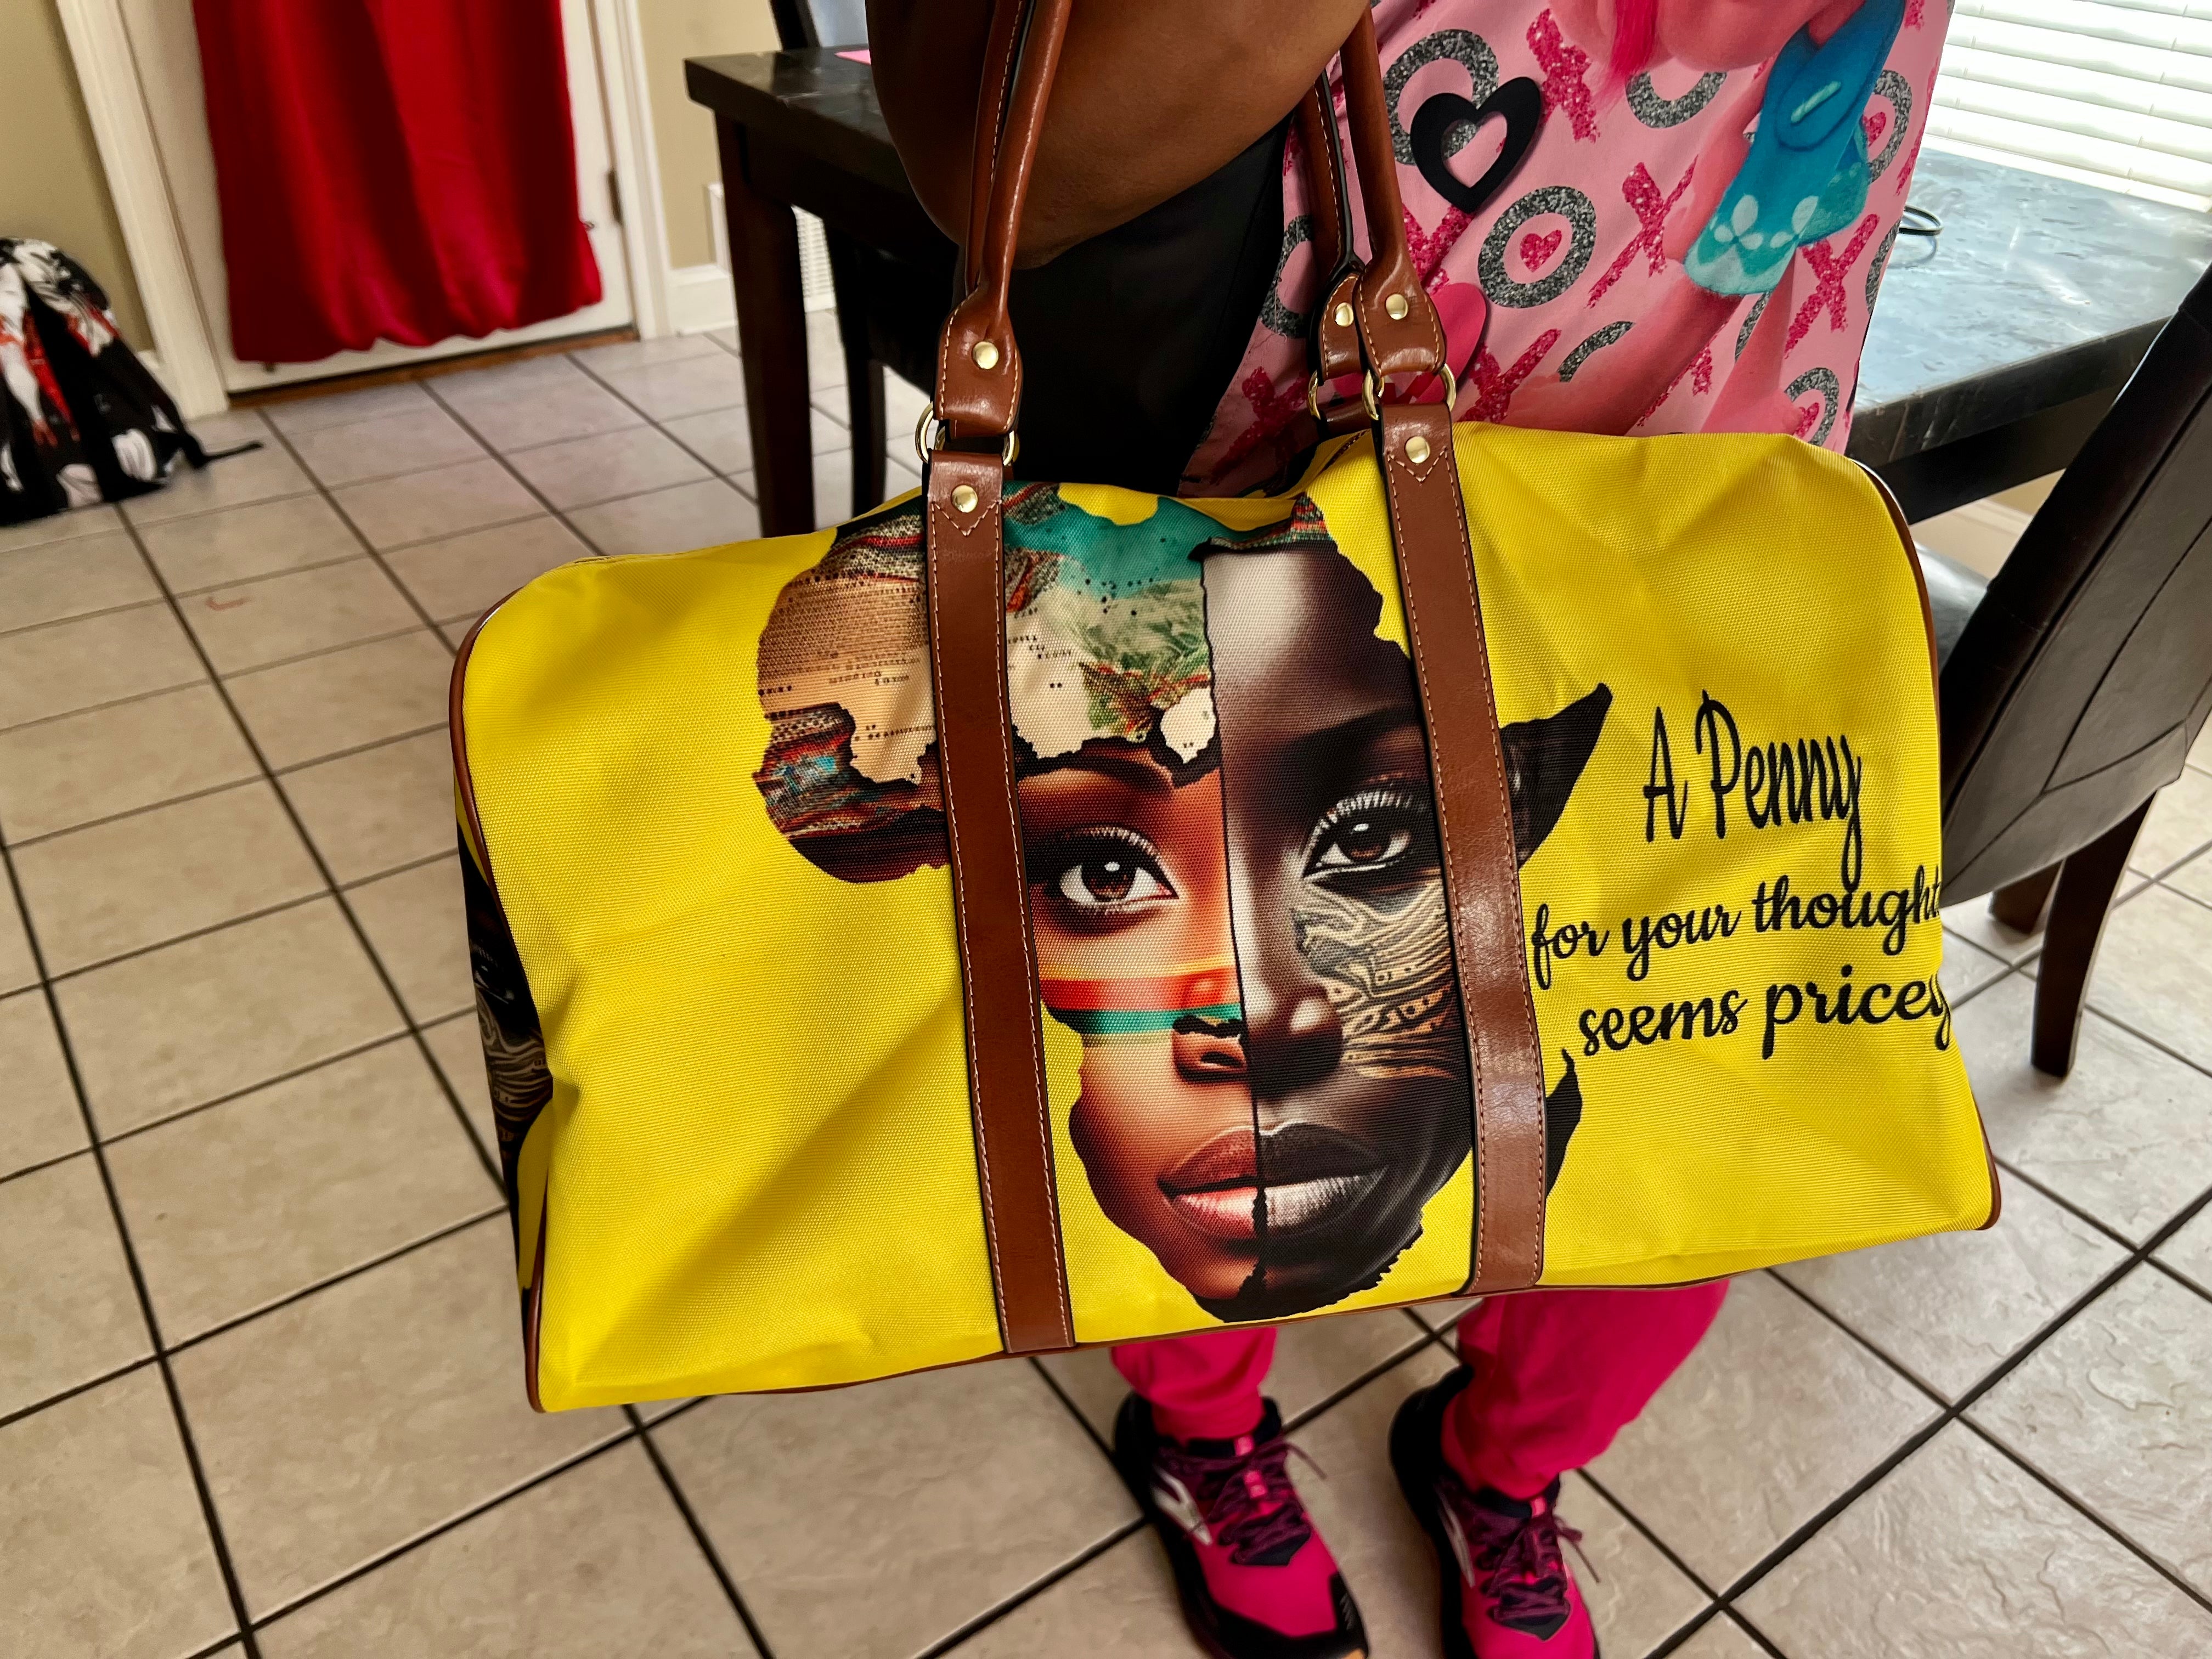 A penny for your thoughts….seems pricey tote bag – Priceless